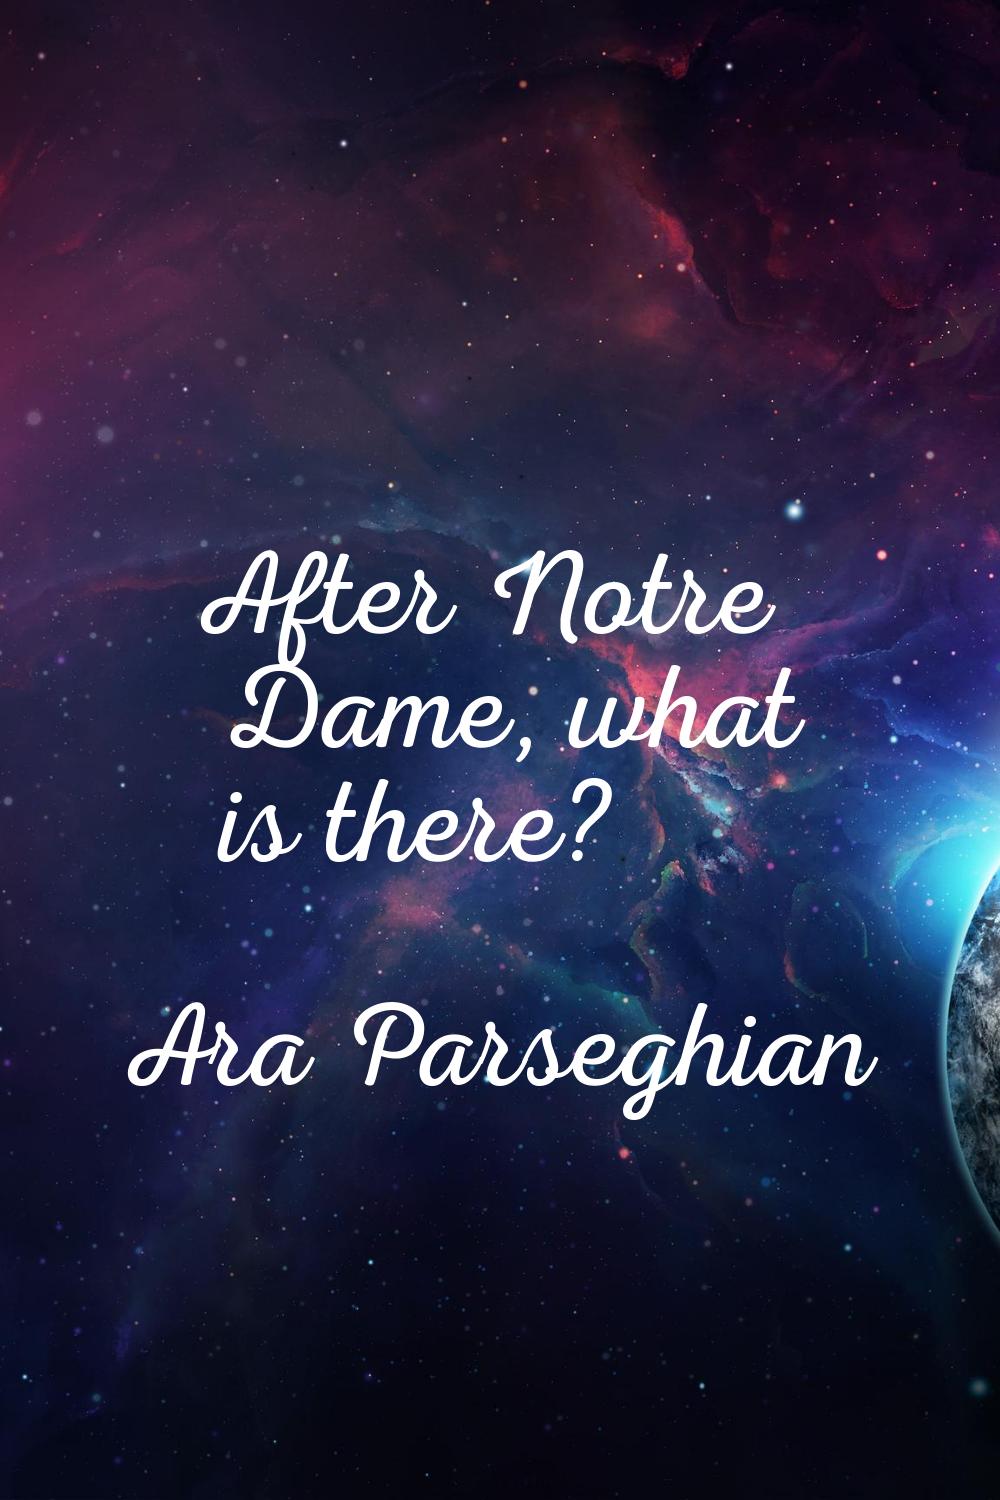 After Notre Dame, what is there?